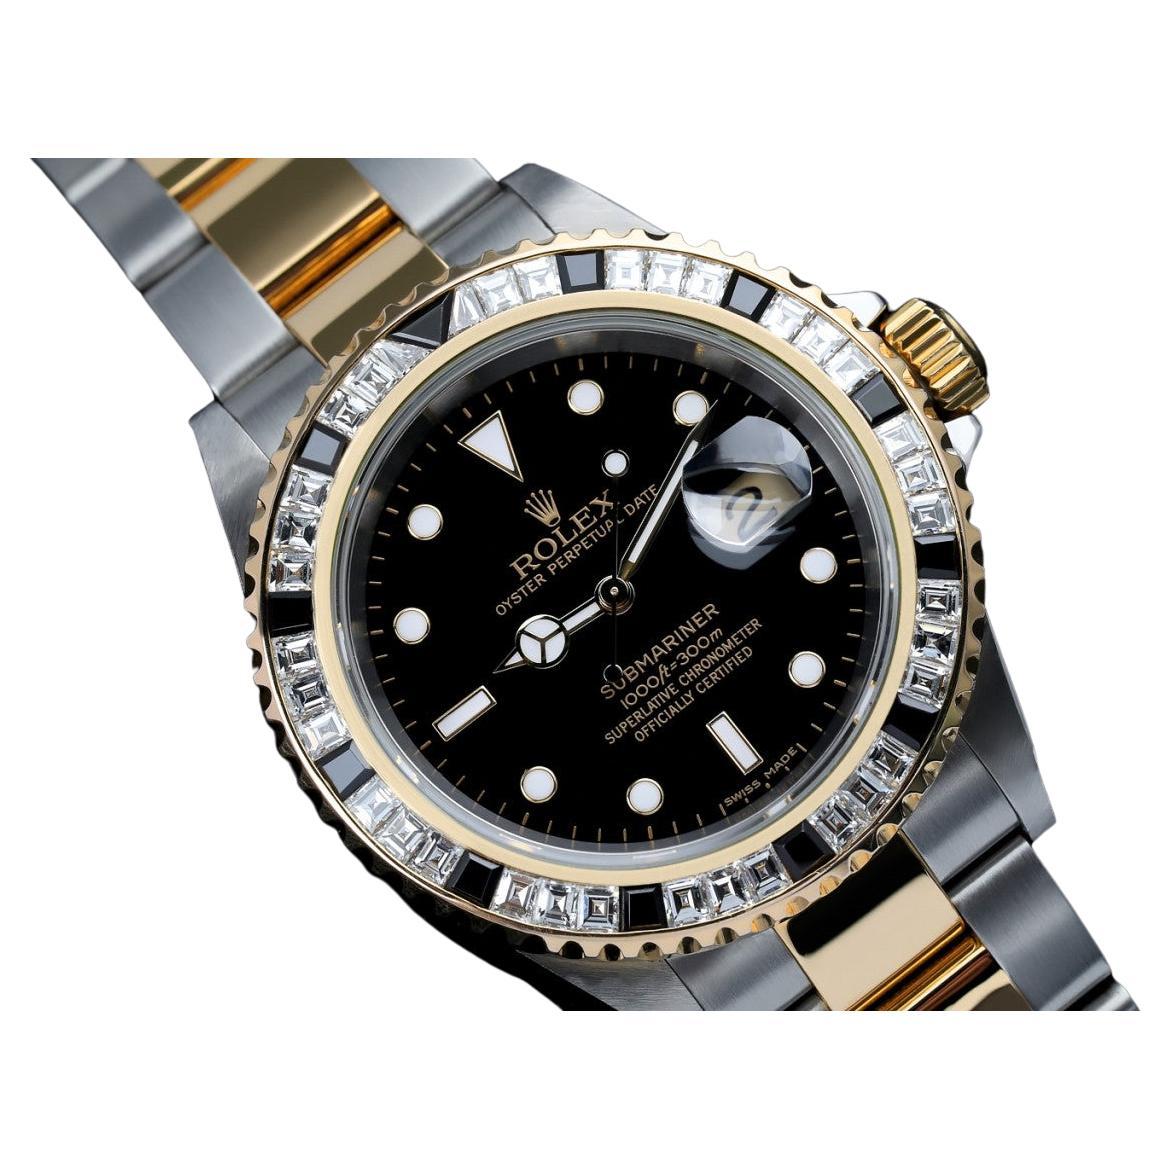 Rolex Submariner Two Tone Watch with Custom Diamond Bezel 16613 For Sale